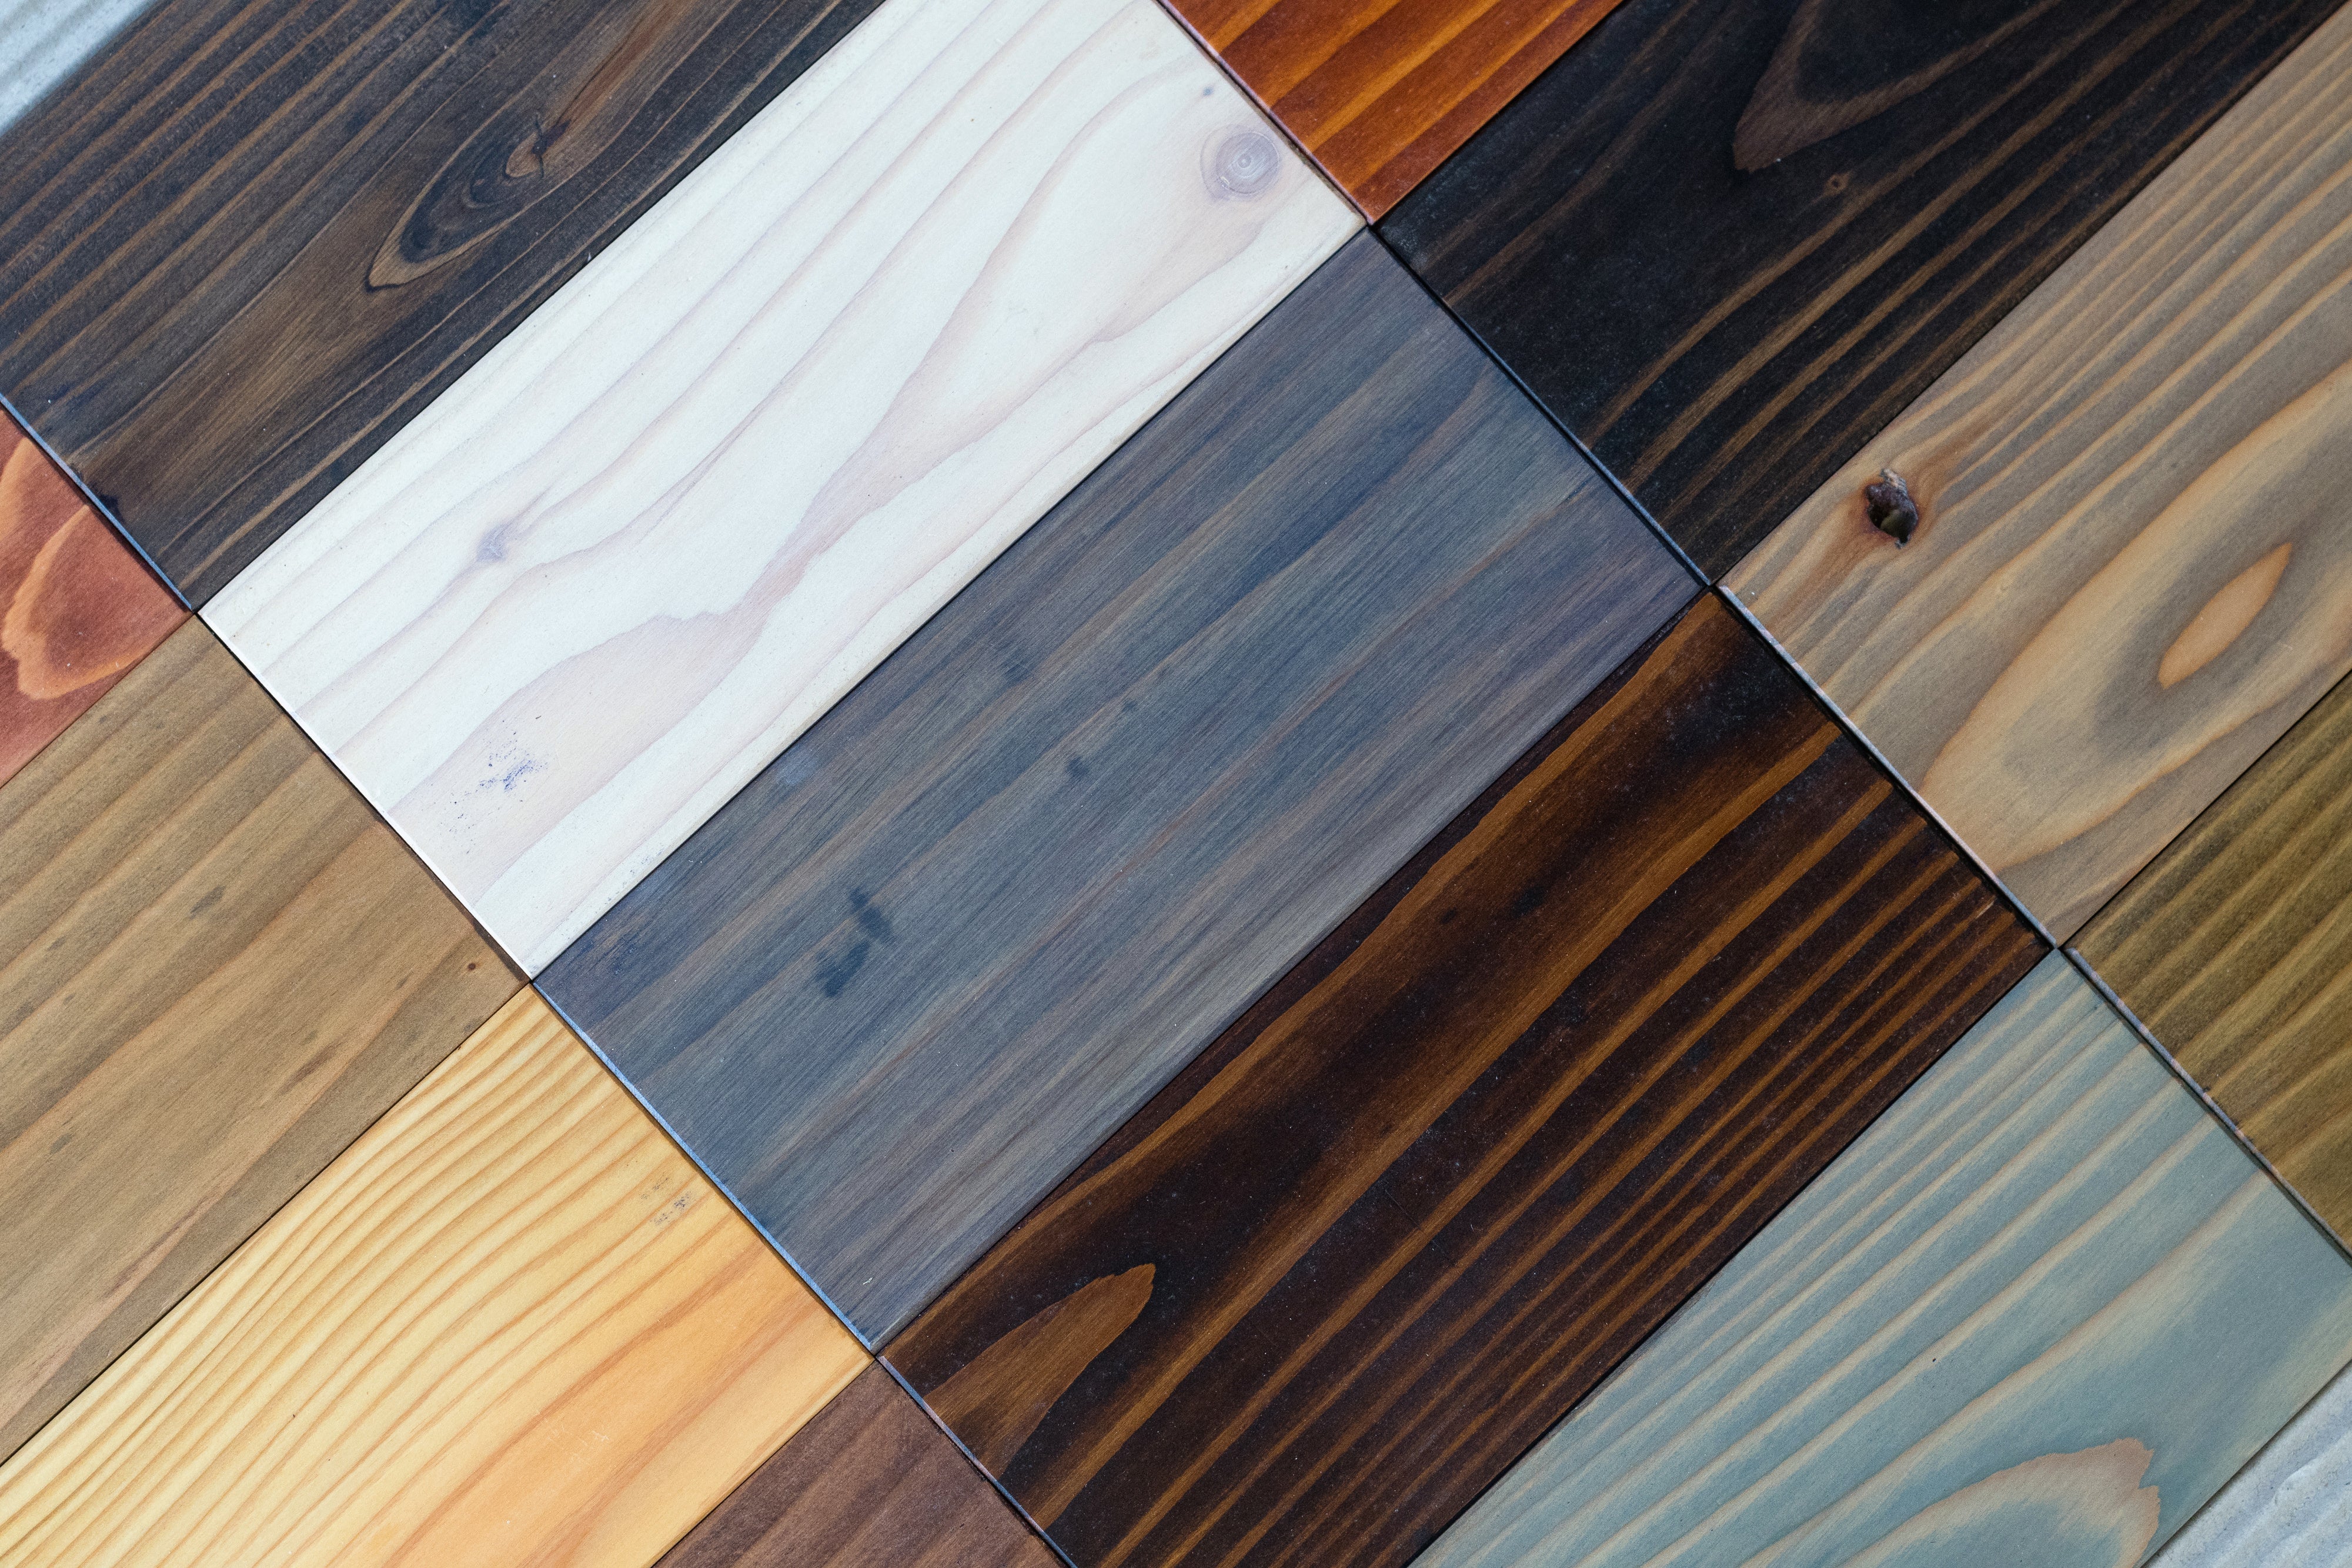 Multicolored types of wood planks.